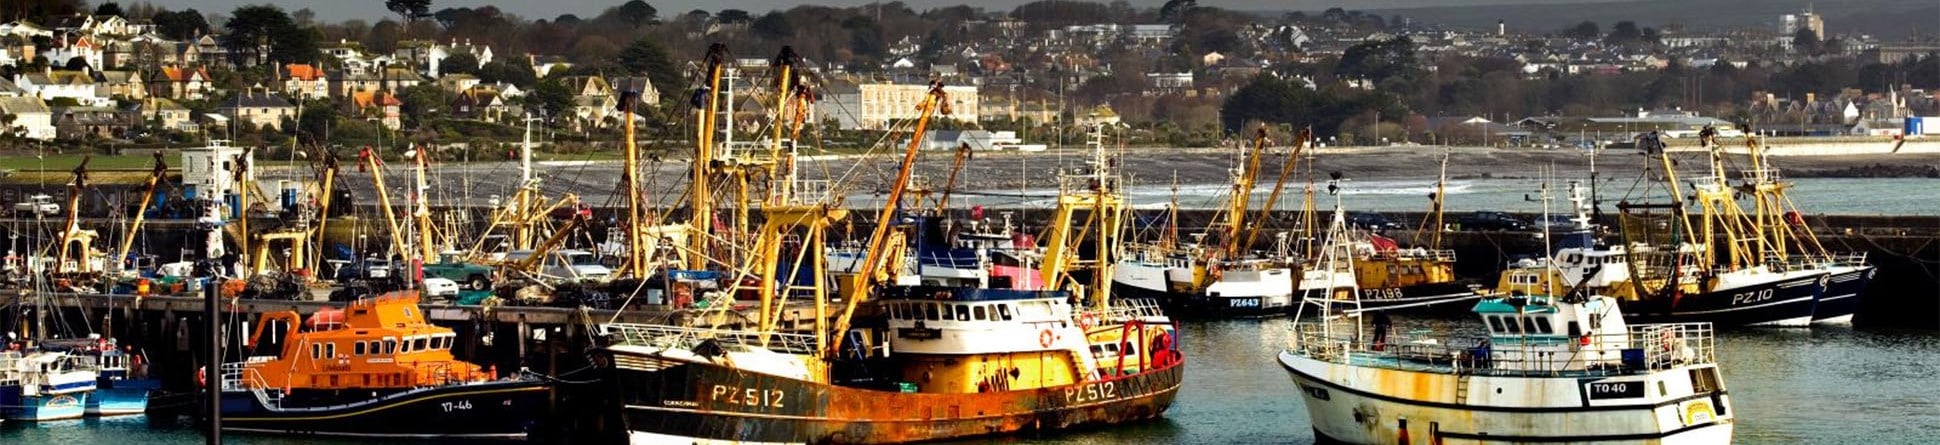 View across the harbour, Newlyn Fishing Port